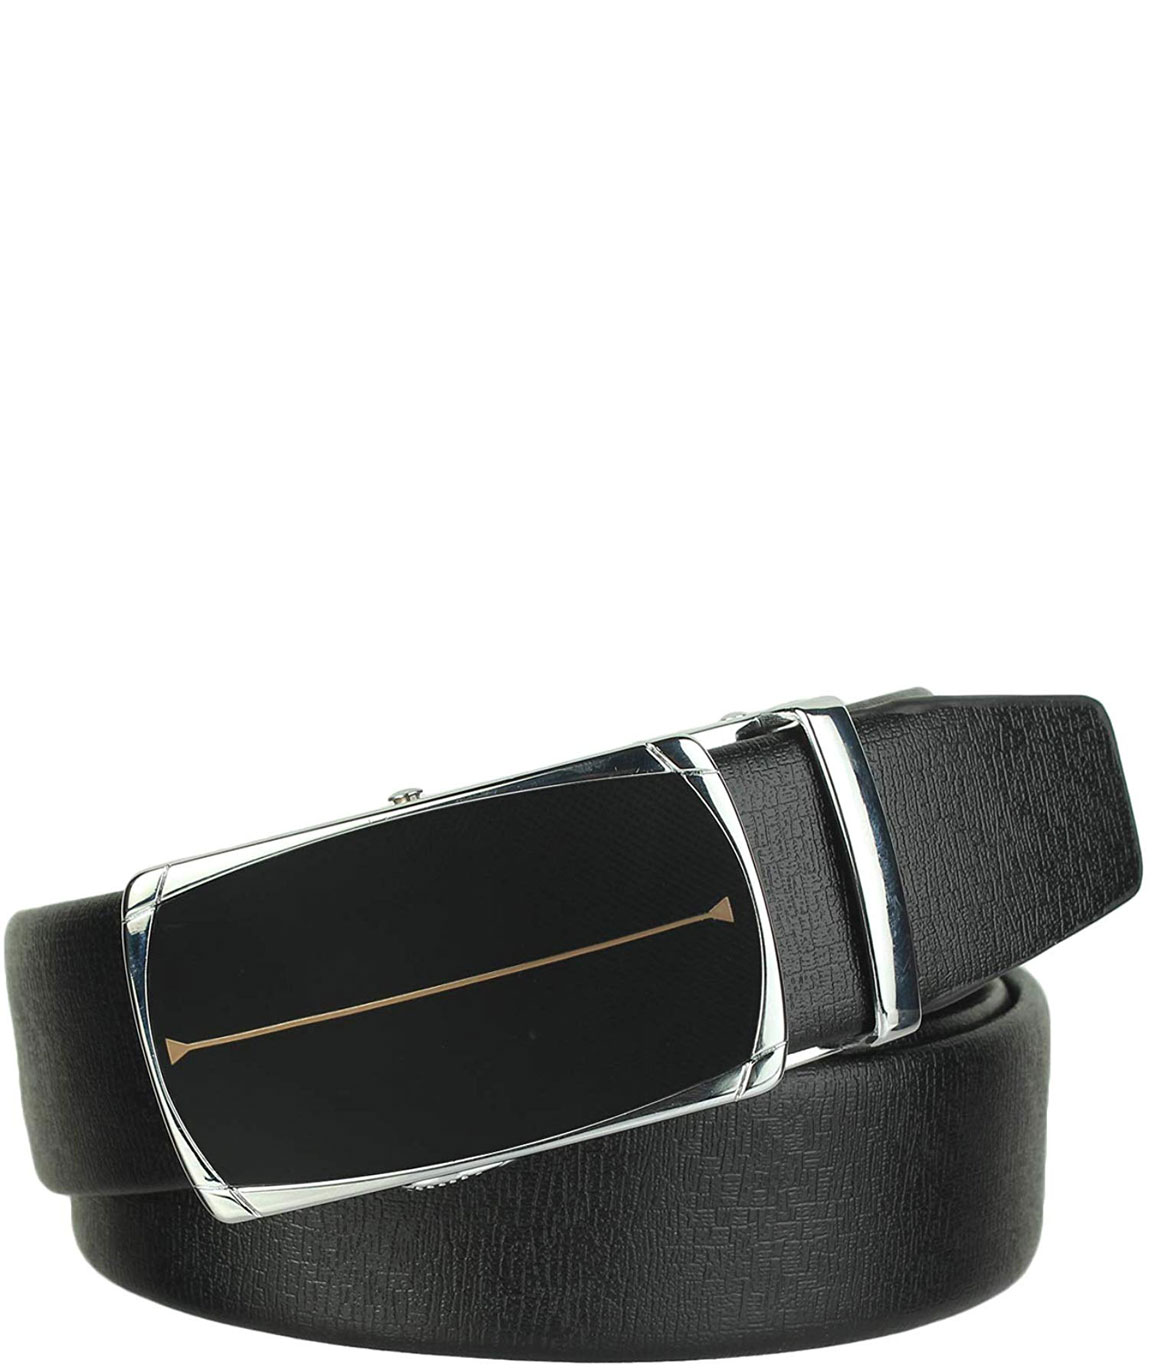 ZORO PU Leather Adjustable autlock ratched Buckle Belts Fashion Waist belt For Casual and Formal - Belt For Men, leather belt for men formal branded,gents belt, formal belt for mens